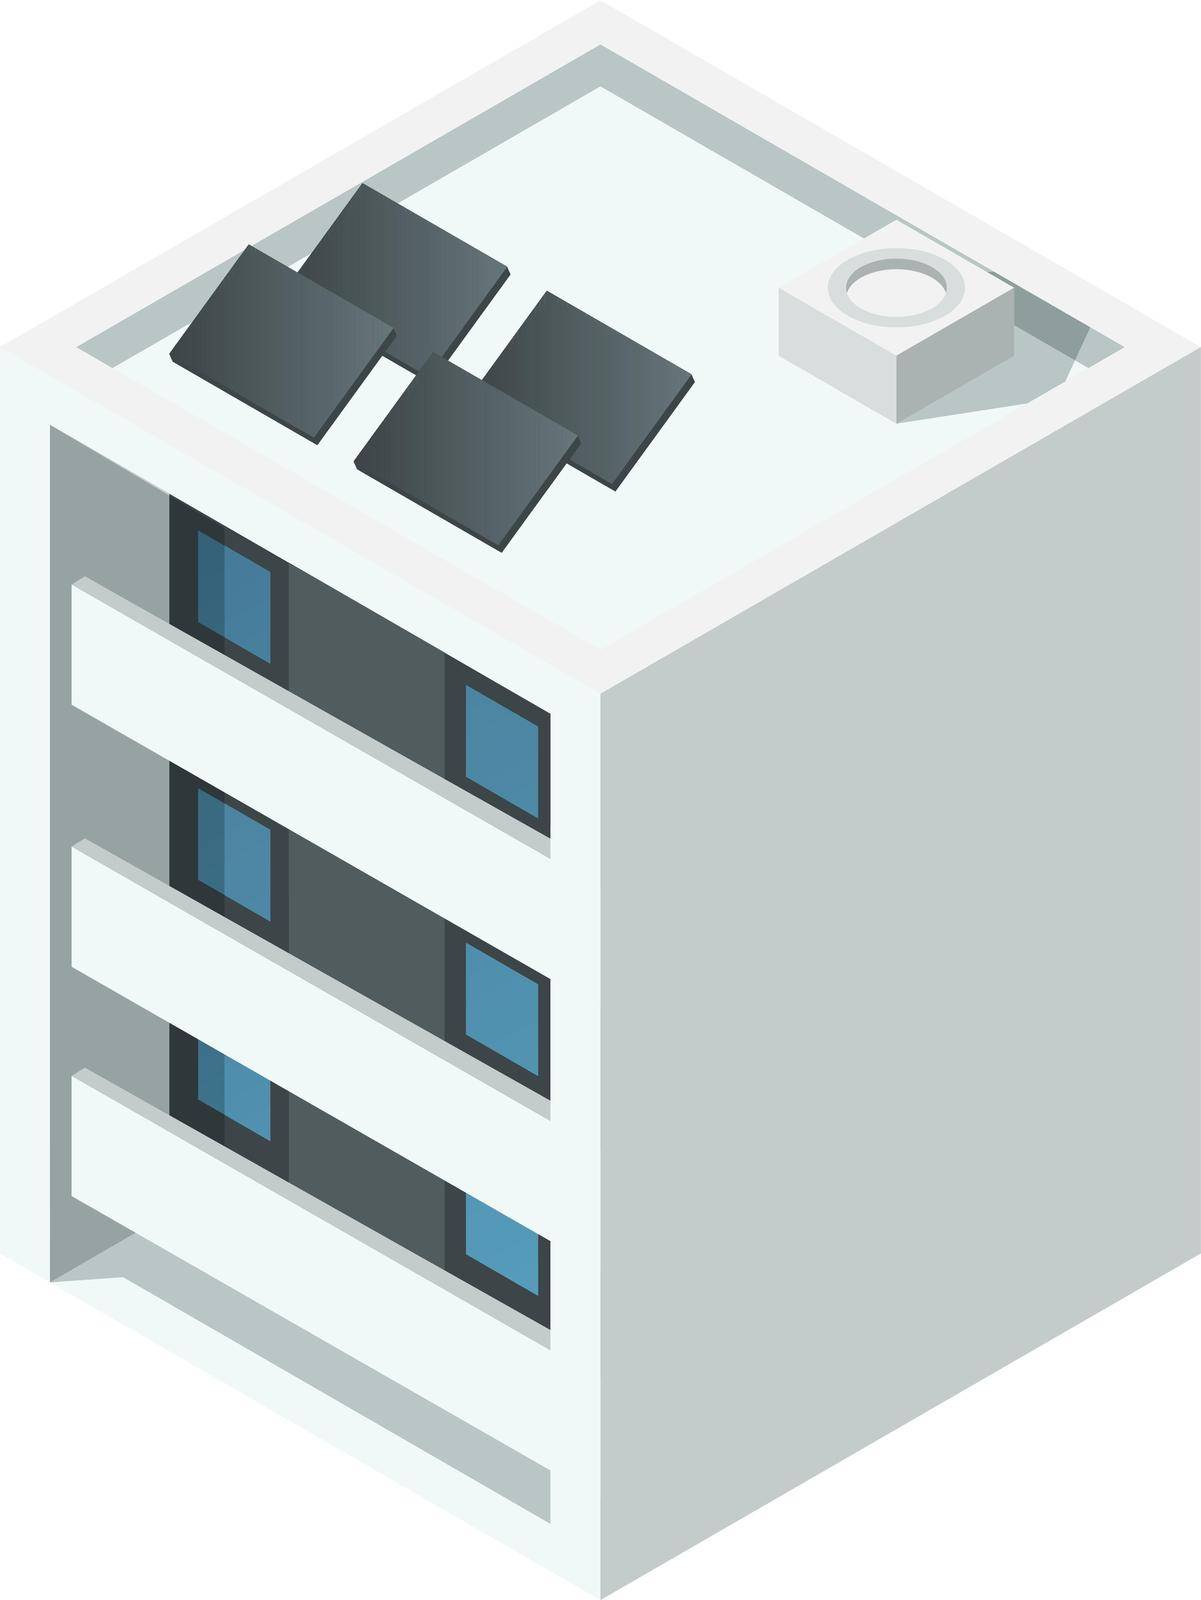 Isometric apartment building. City residential real estate by ONYXprj